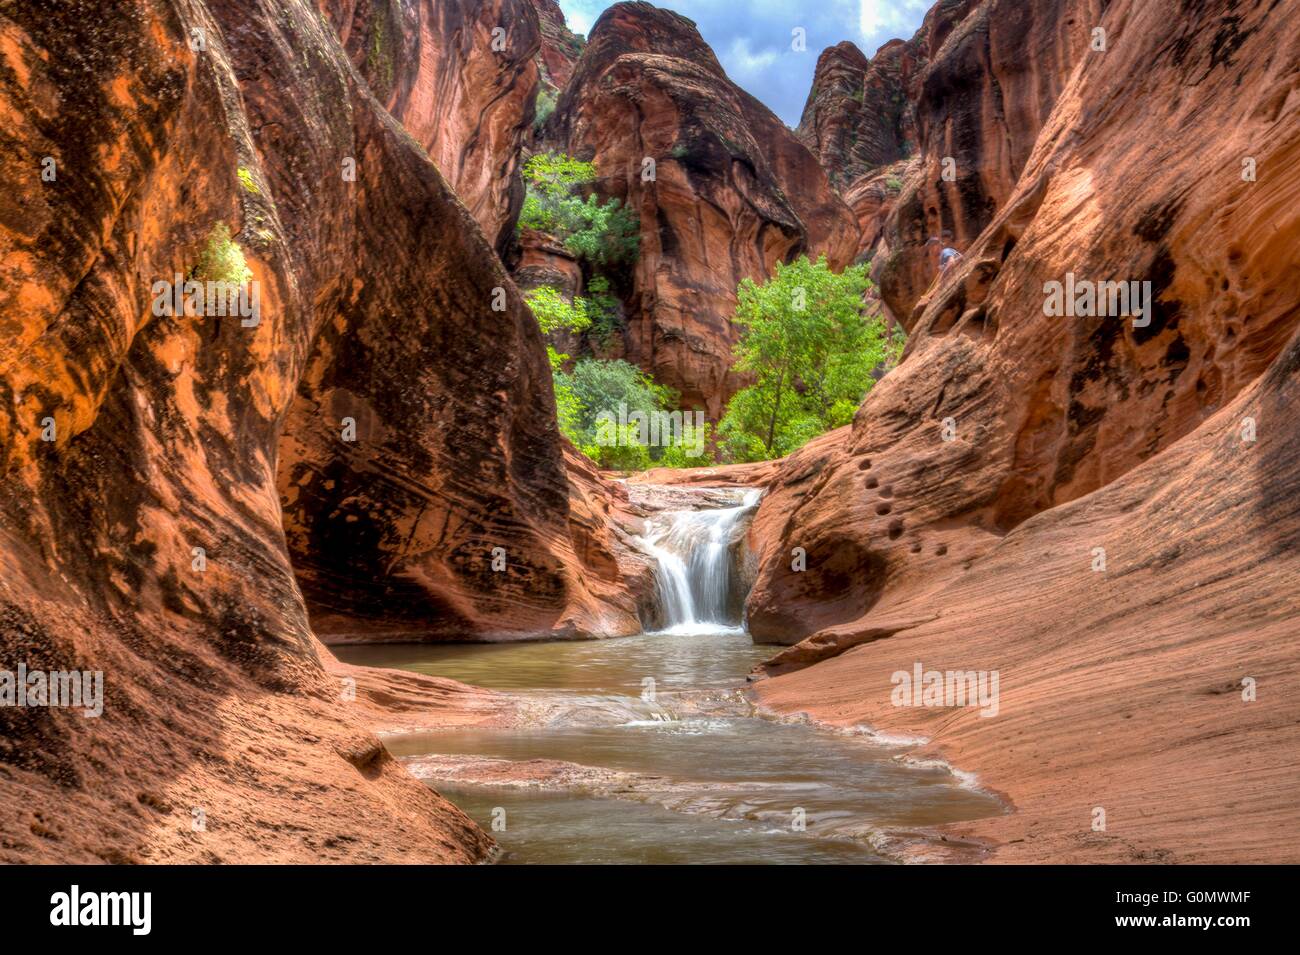 A waterfall spills through the rock hills and desert at the Red Cliffs National Conservation Area where the Colorado Plateau, Great Basin Desert, and Mojave Desert overlap near St. George, Utah. Stock Photo